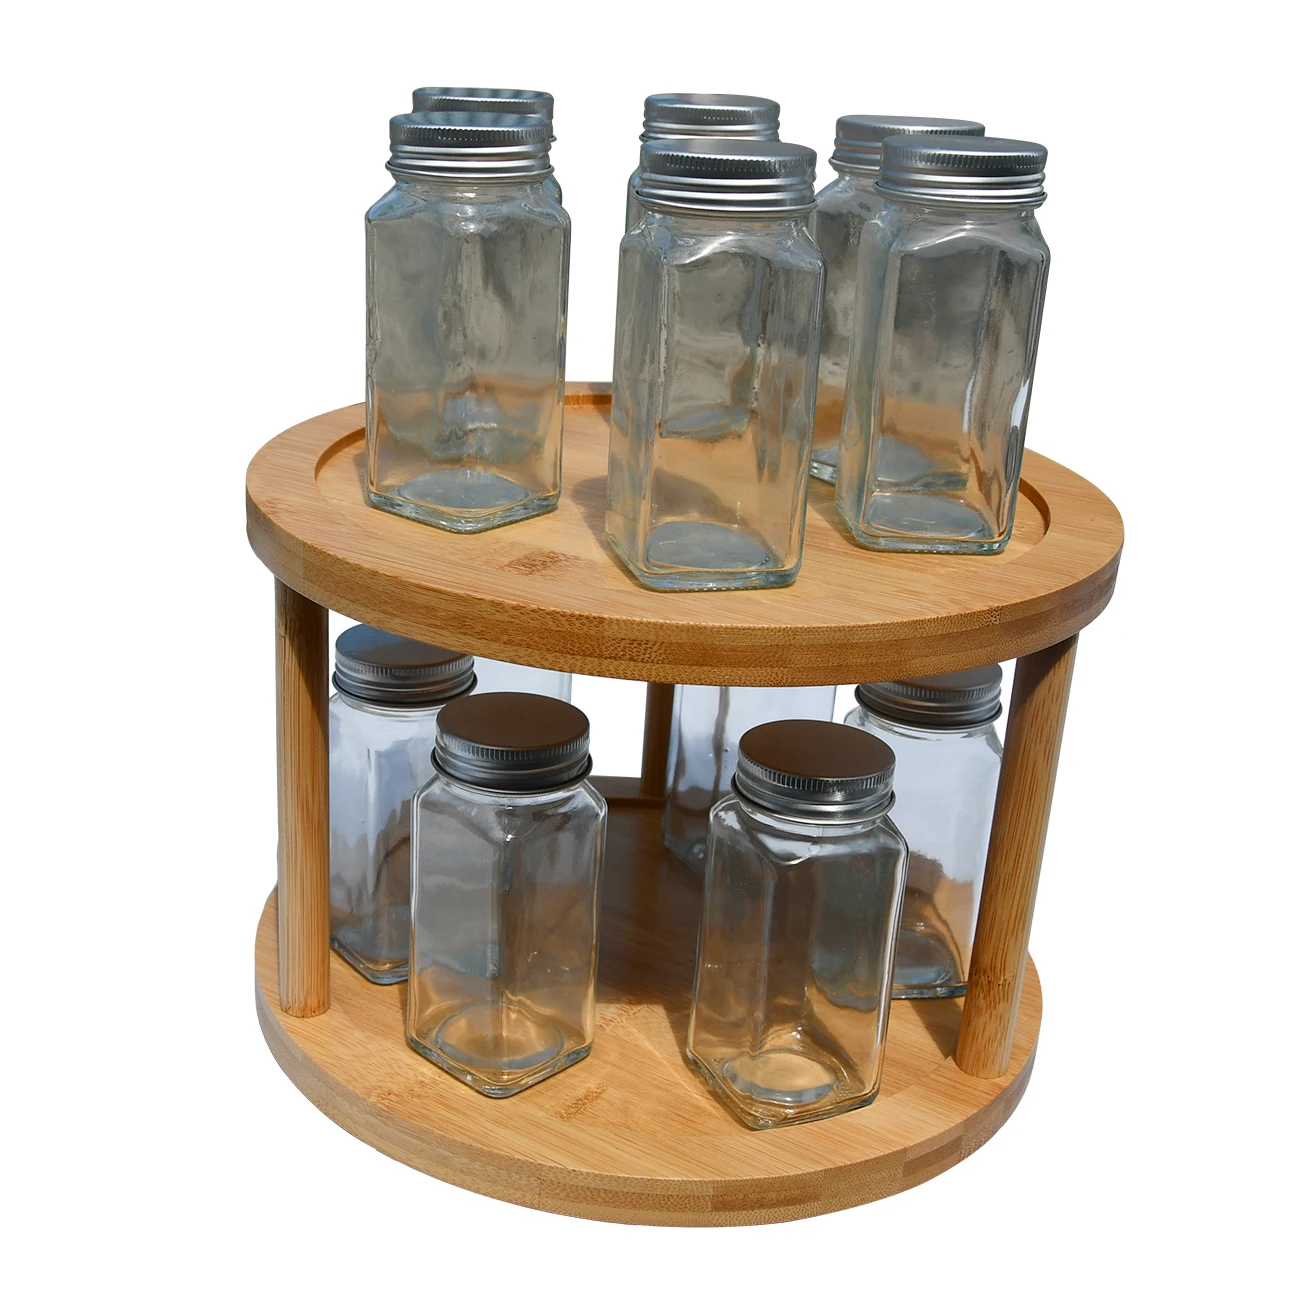 Free-standing Round Wood Rotating Spice Rack Organizer For Home &  Kitchen